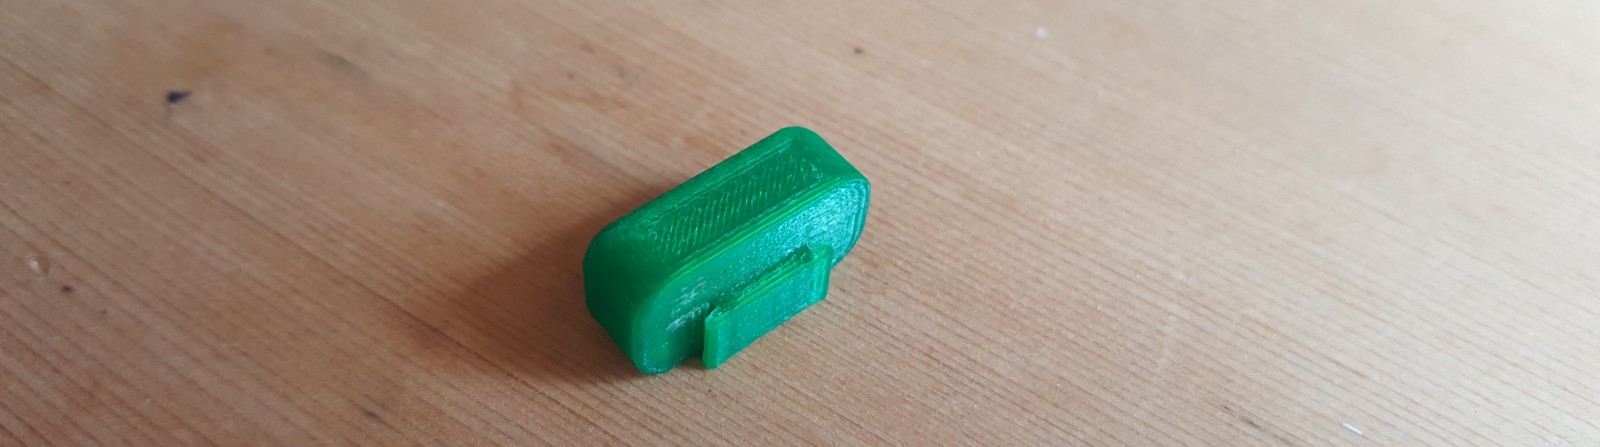 Floppy disk button 3D printed